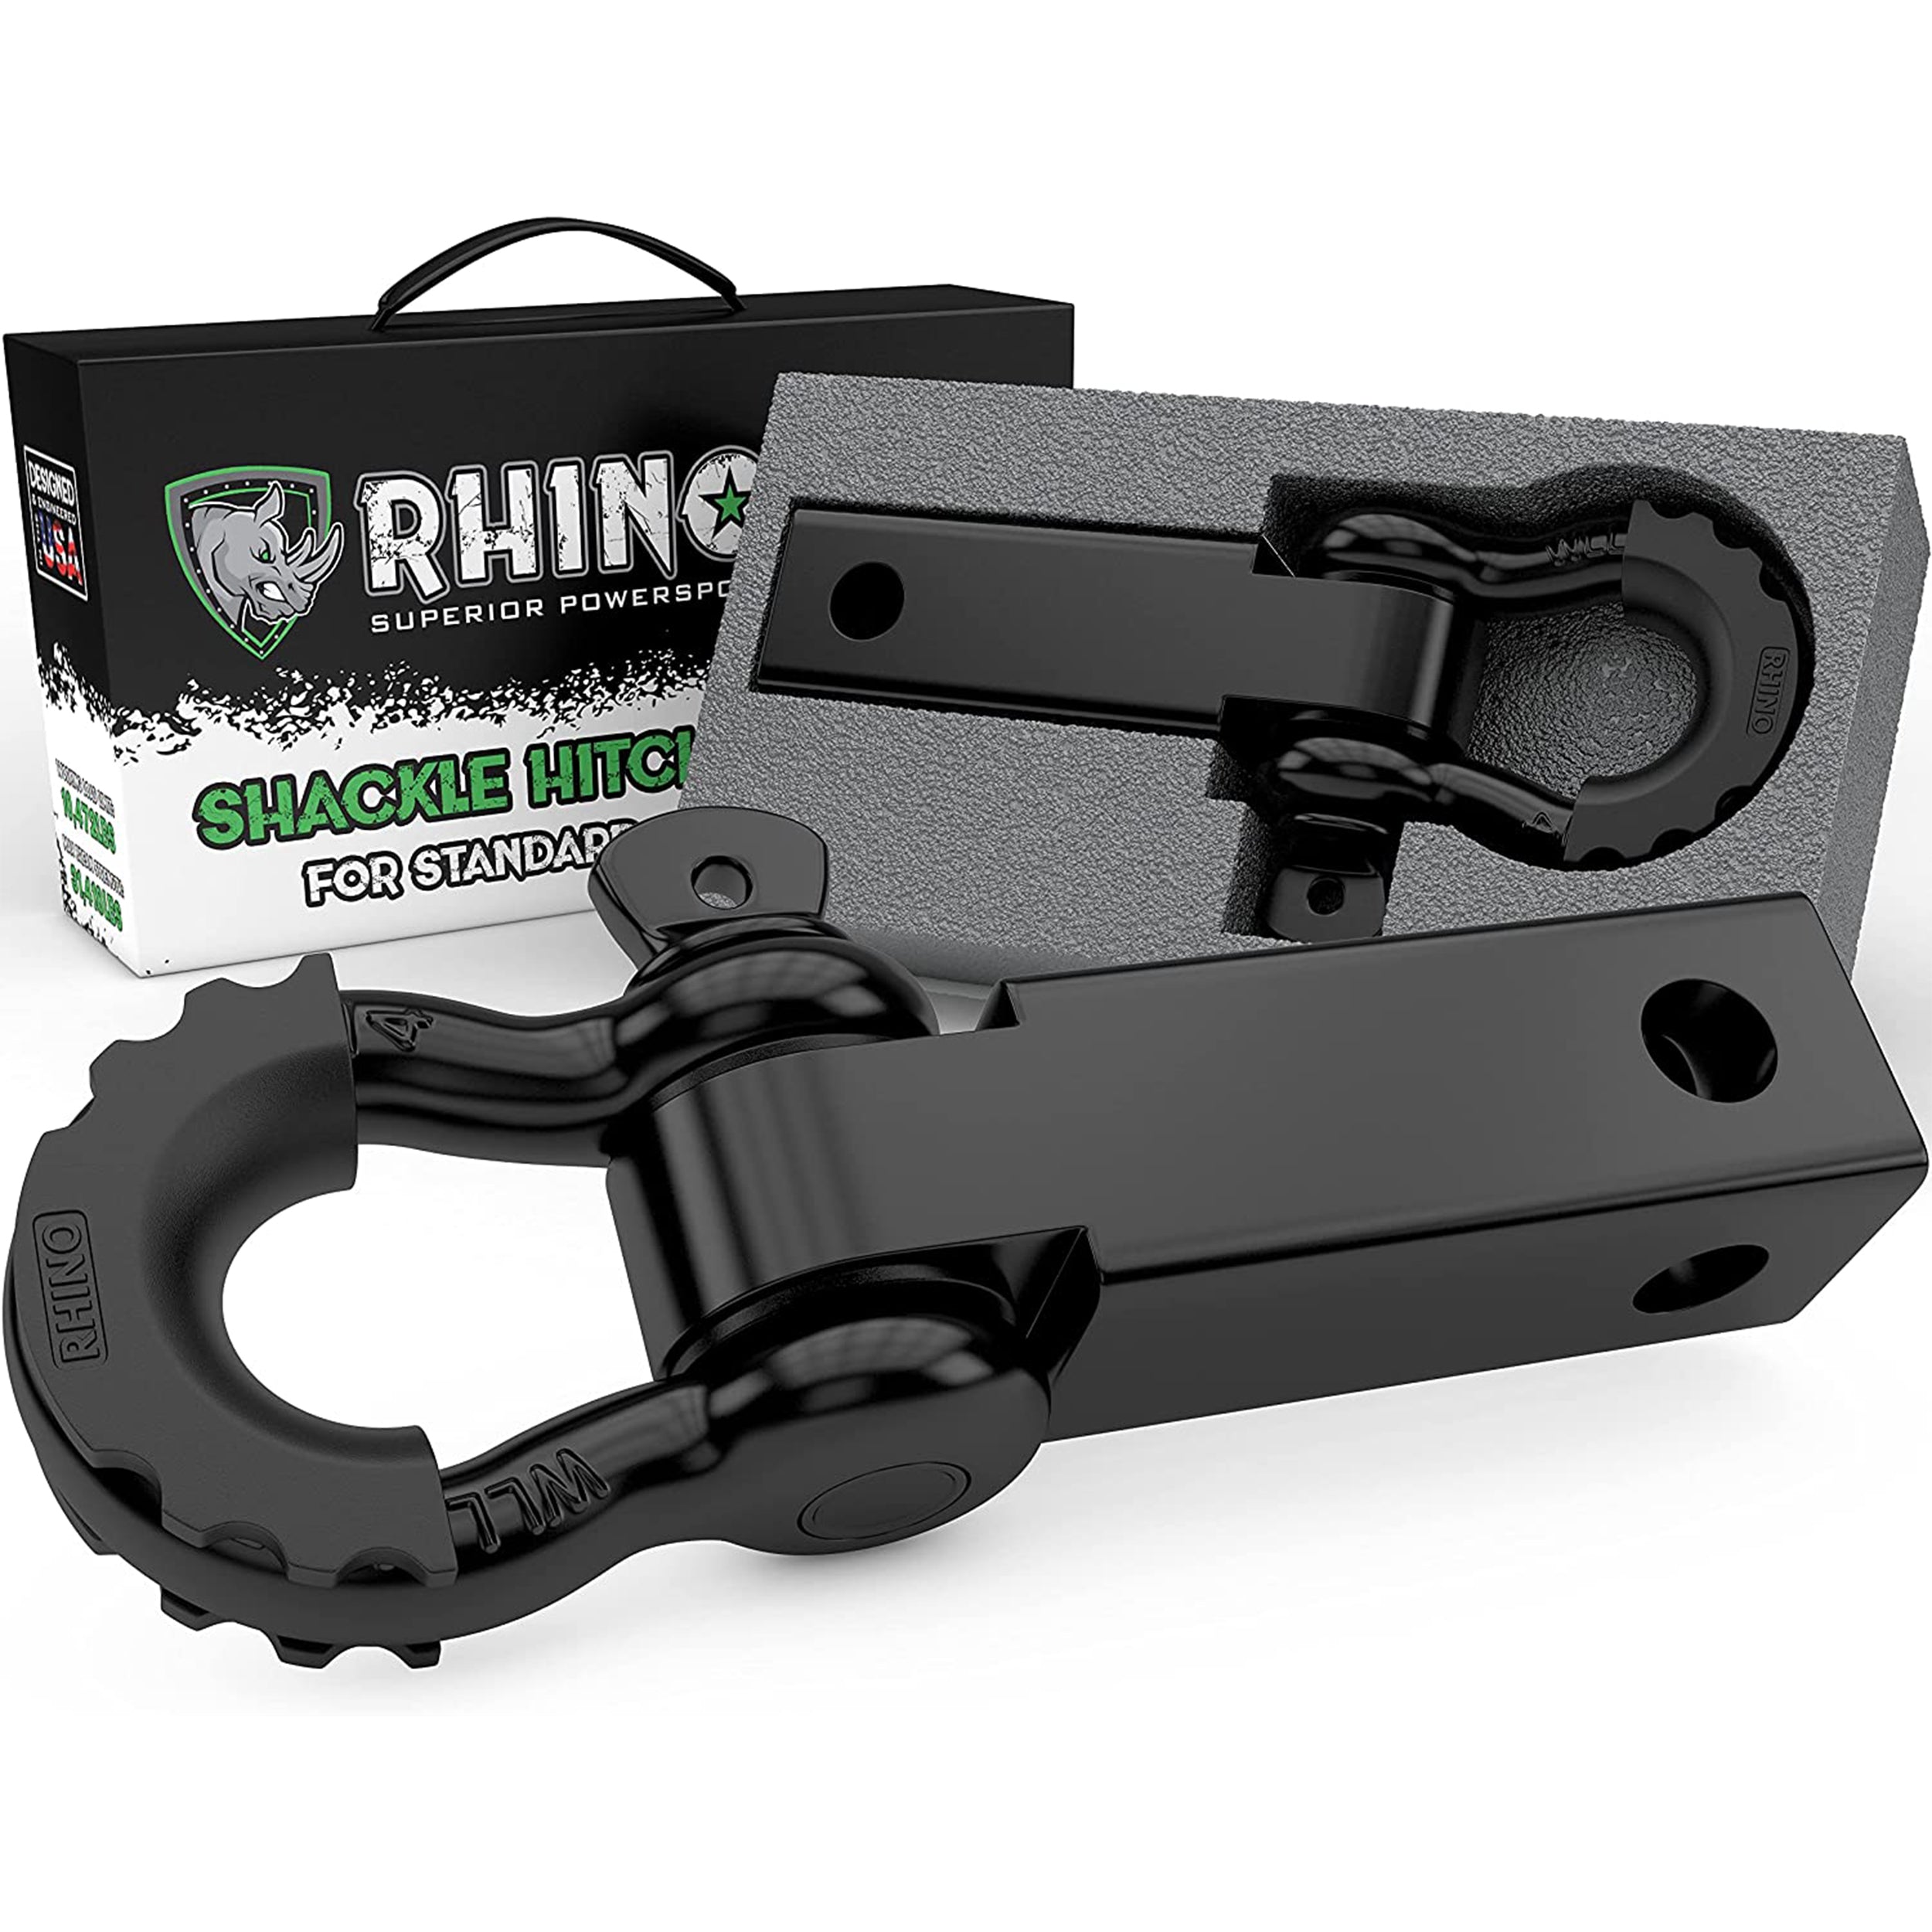 Rhino USA Shackle Hitch Receiver Best Towing Accessories for Trucks Jeeps